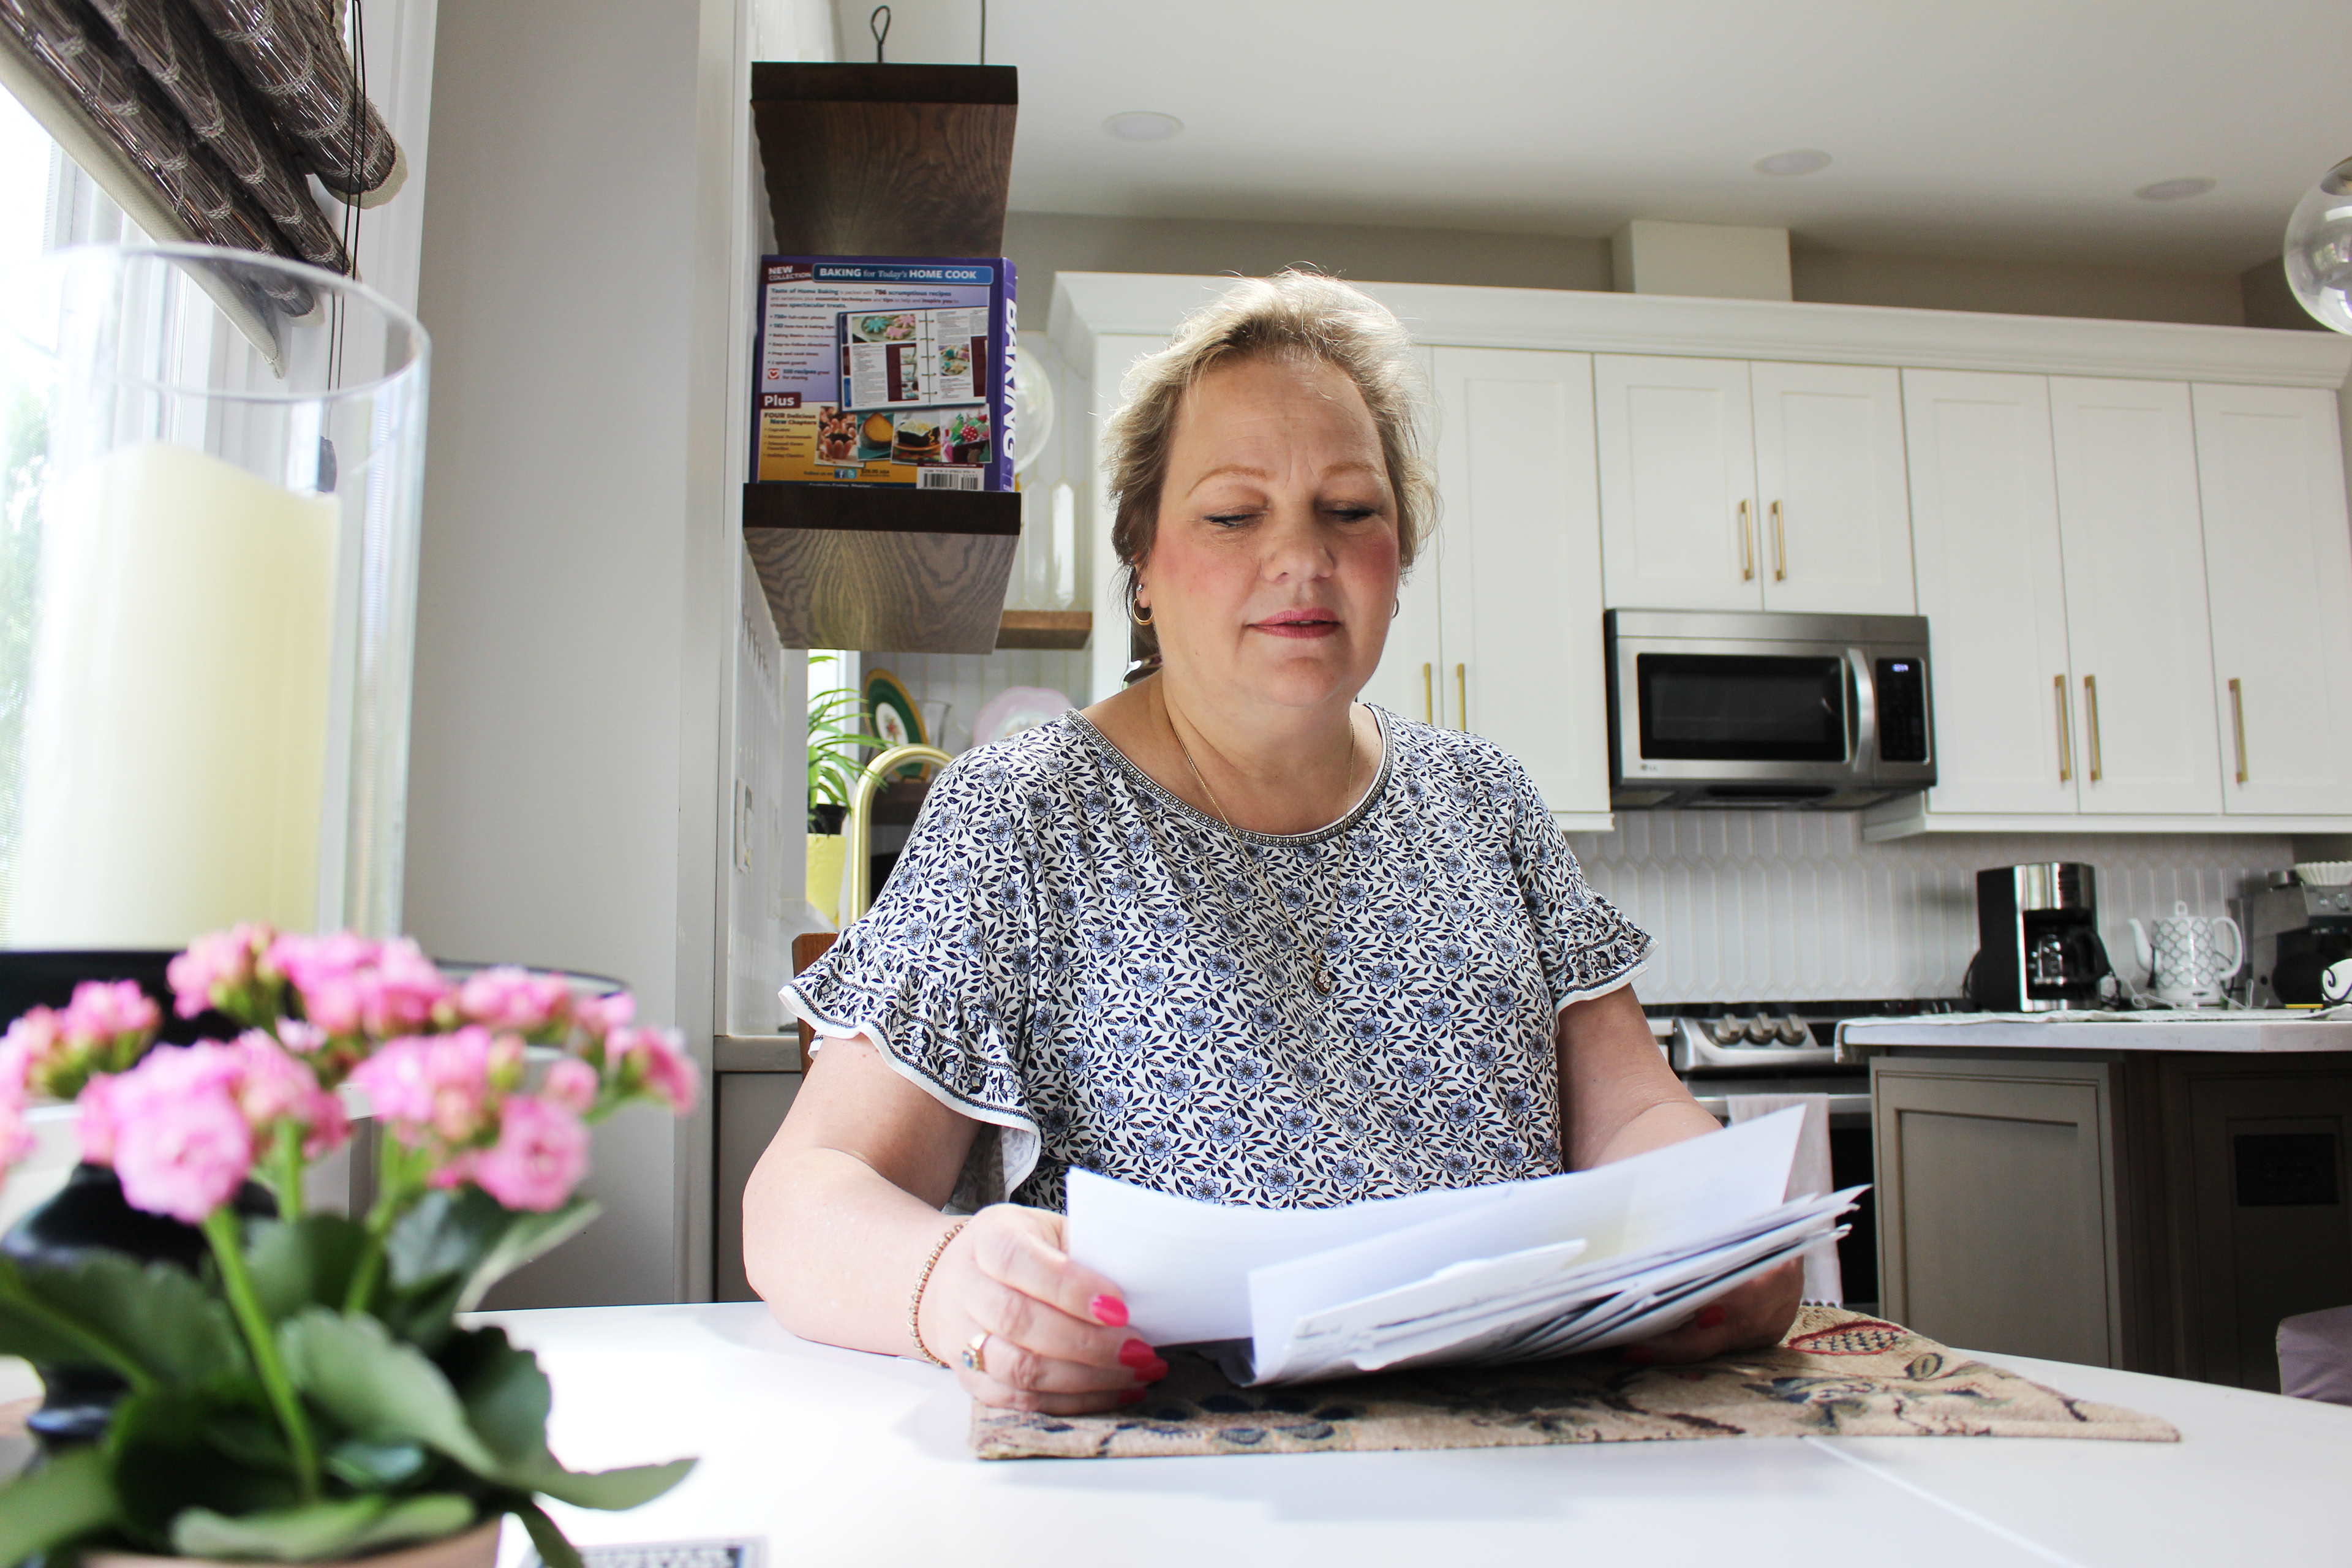 Peggy Dula is seen sitting at a kitchen table by a window. She is looking over medical bills.